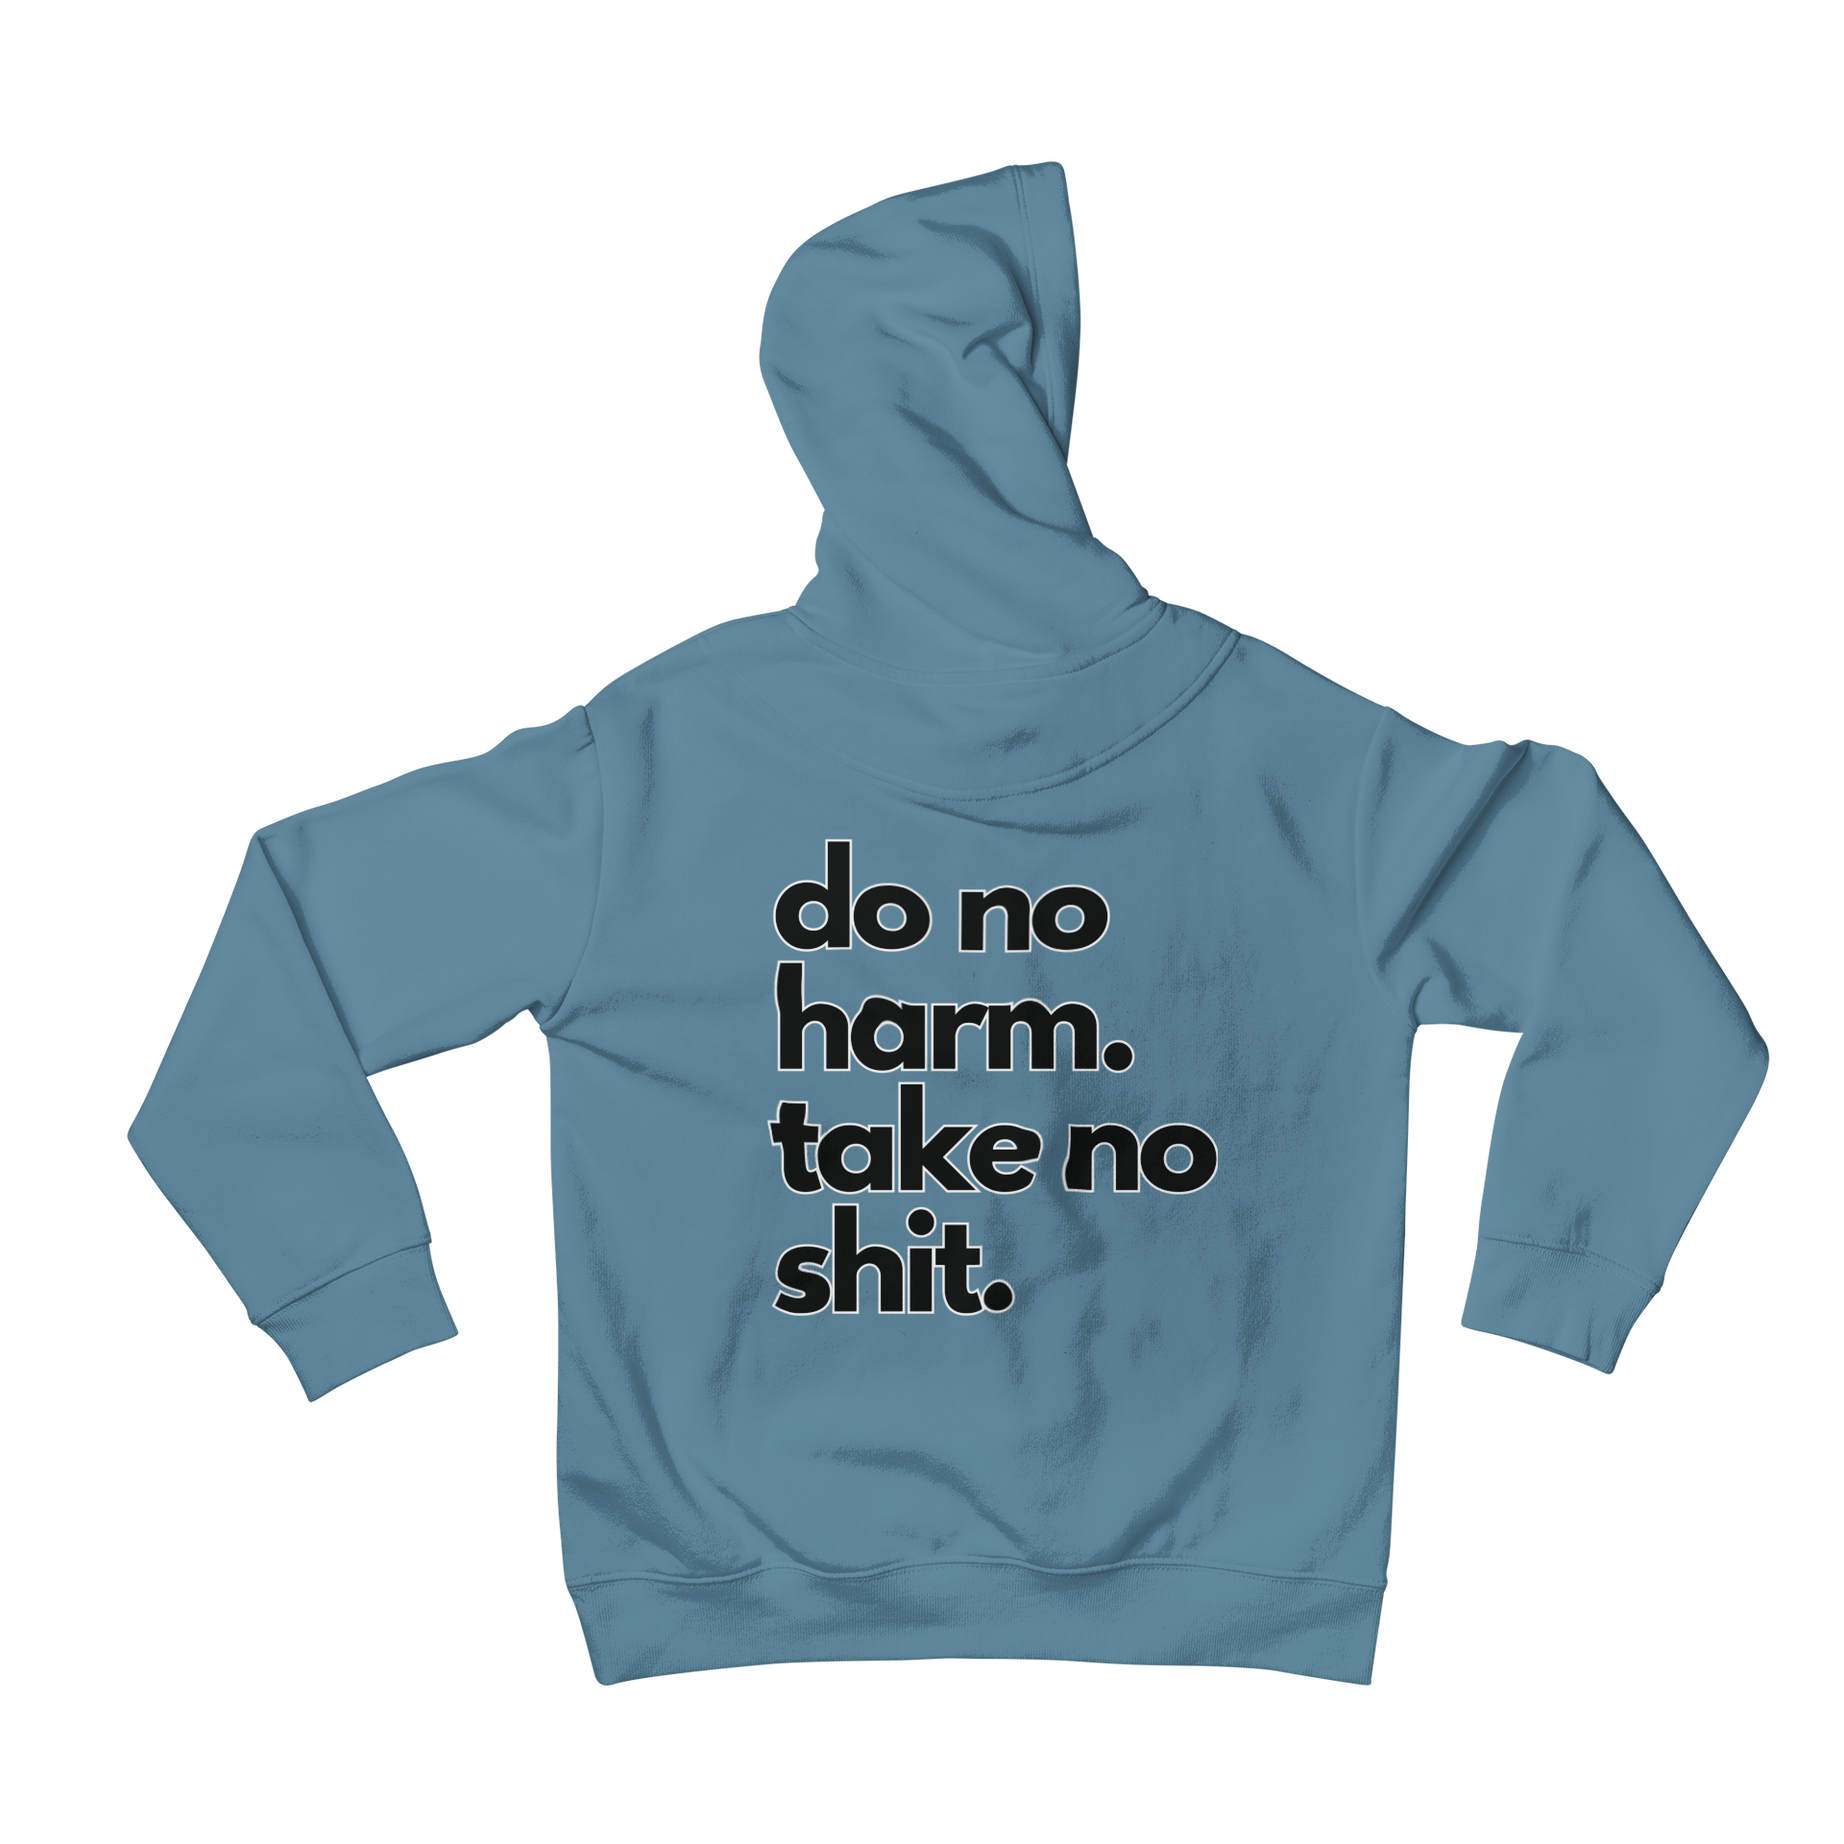 This Do No Harm Back Print Hoodie is the perfect way to make a statement with your wardrobe. With a bold slogan that reads "Do No Harm Take No Shit", it is sure to grab attention. The hoodie is made from high-quality materials, so it is both comfortable and durable. Wear it and spread your message with effortless style.